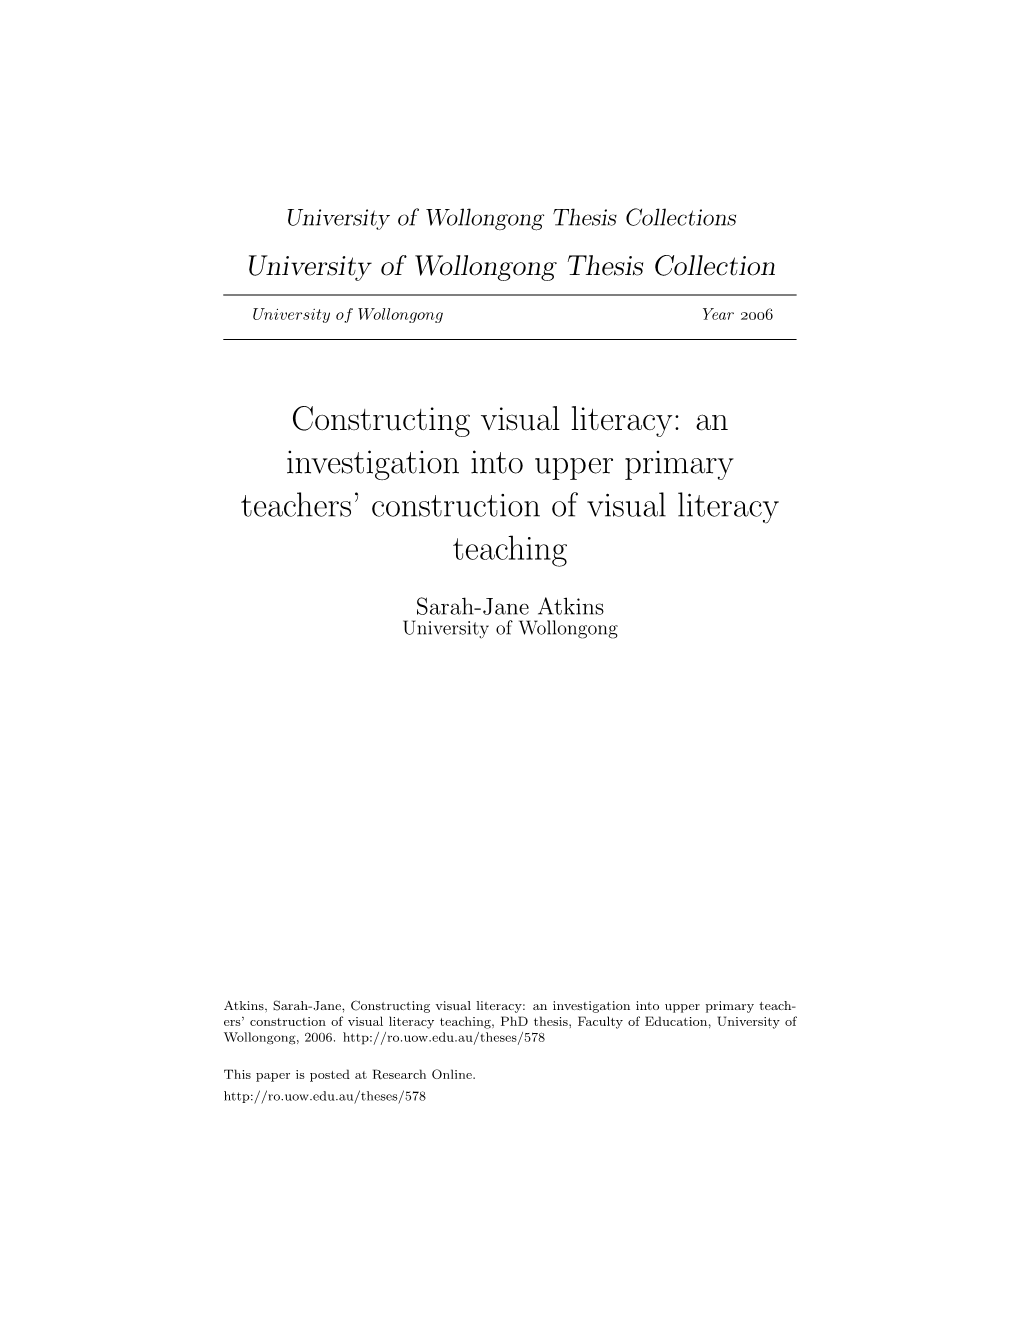 Constructing Visual Literacy: an Investigation Into Upper Primary Teachers’ Construction of Visual Literacy Teaching